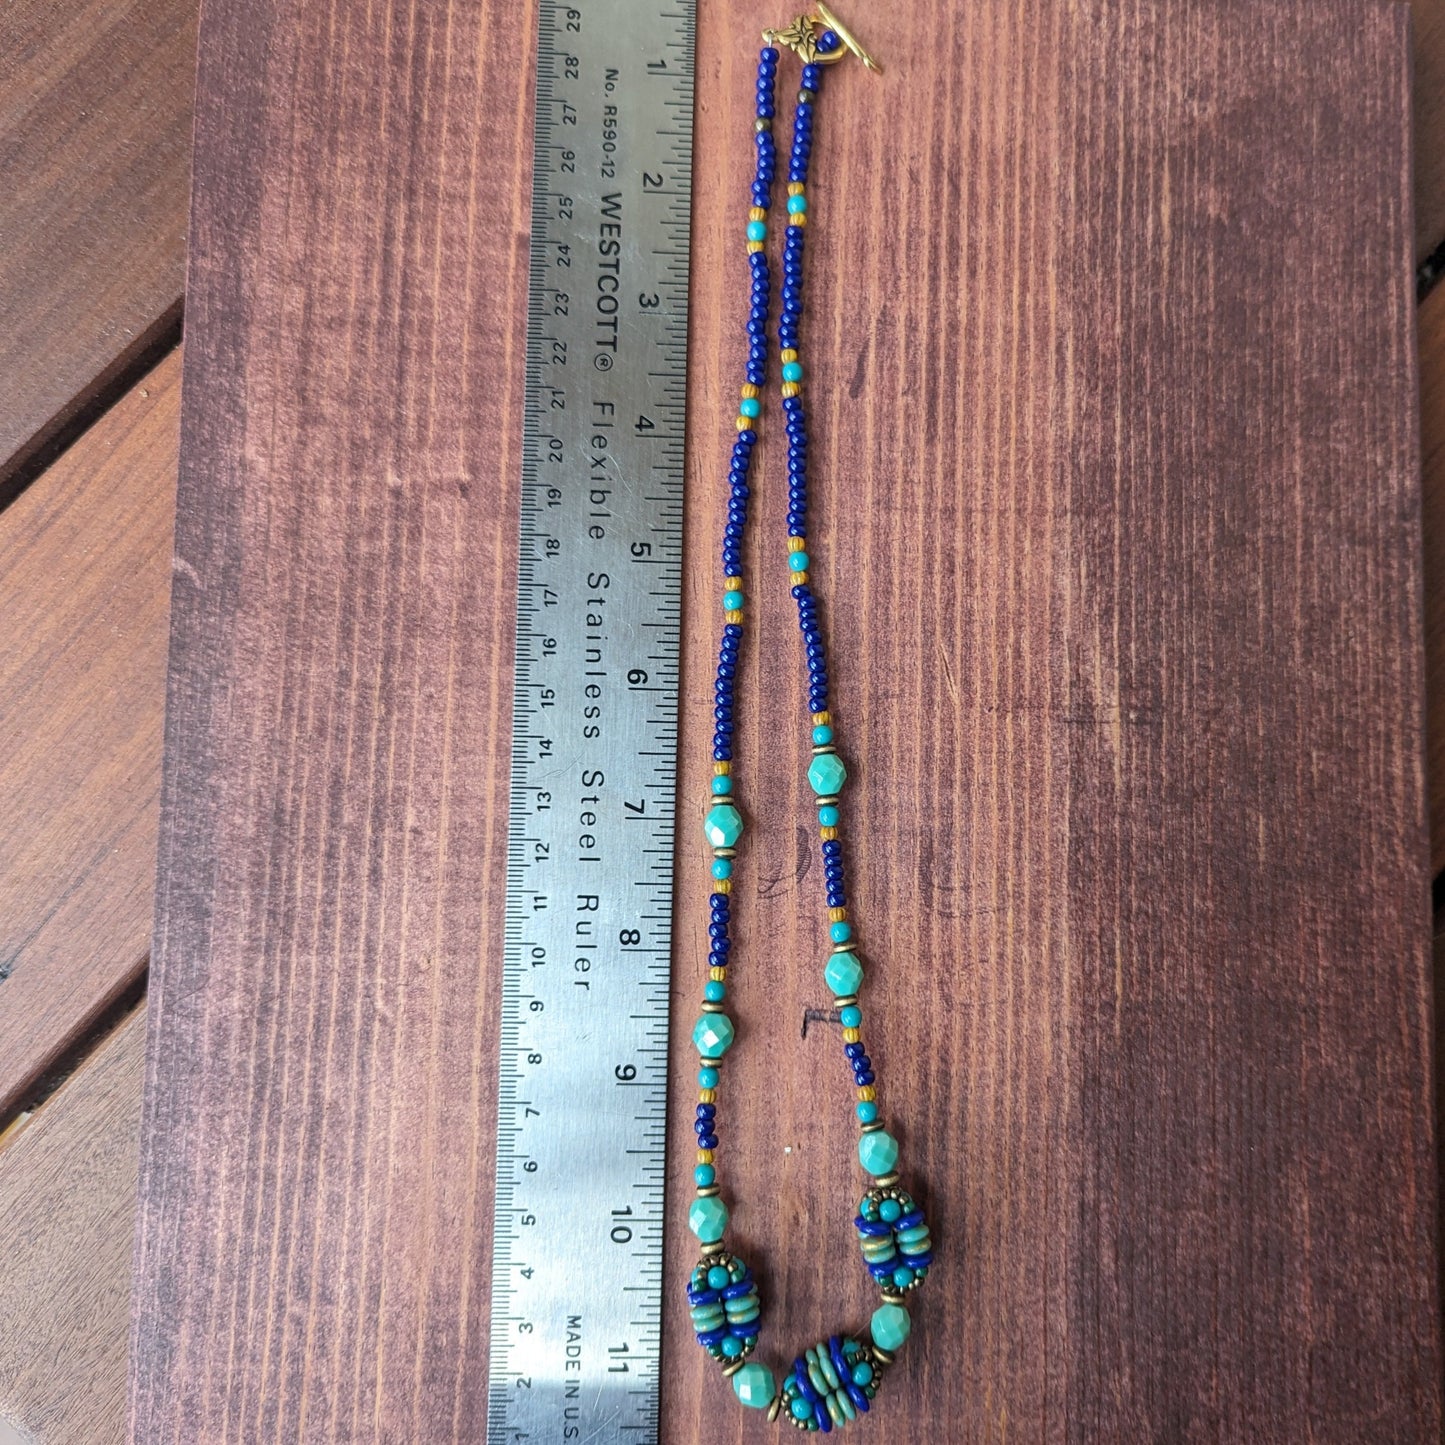 A royal blue and turquoise necklace laying next to a metal ruler on a reddish wood board. The necklace has three clusters of beaded spheres. 